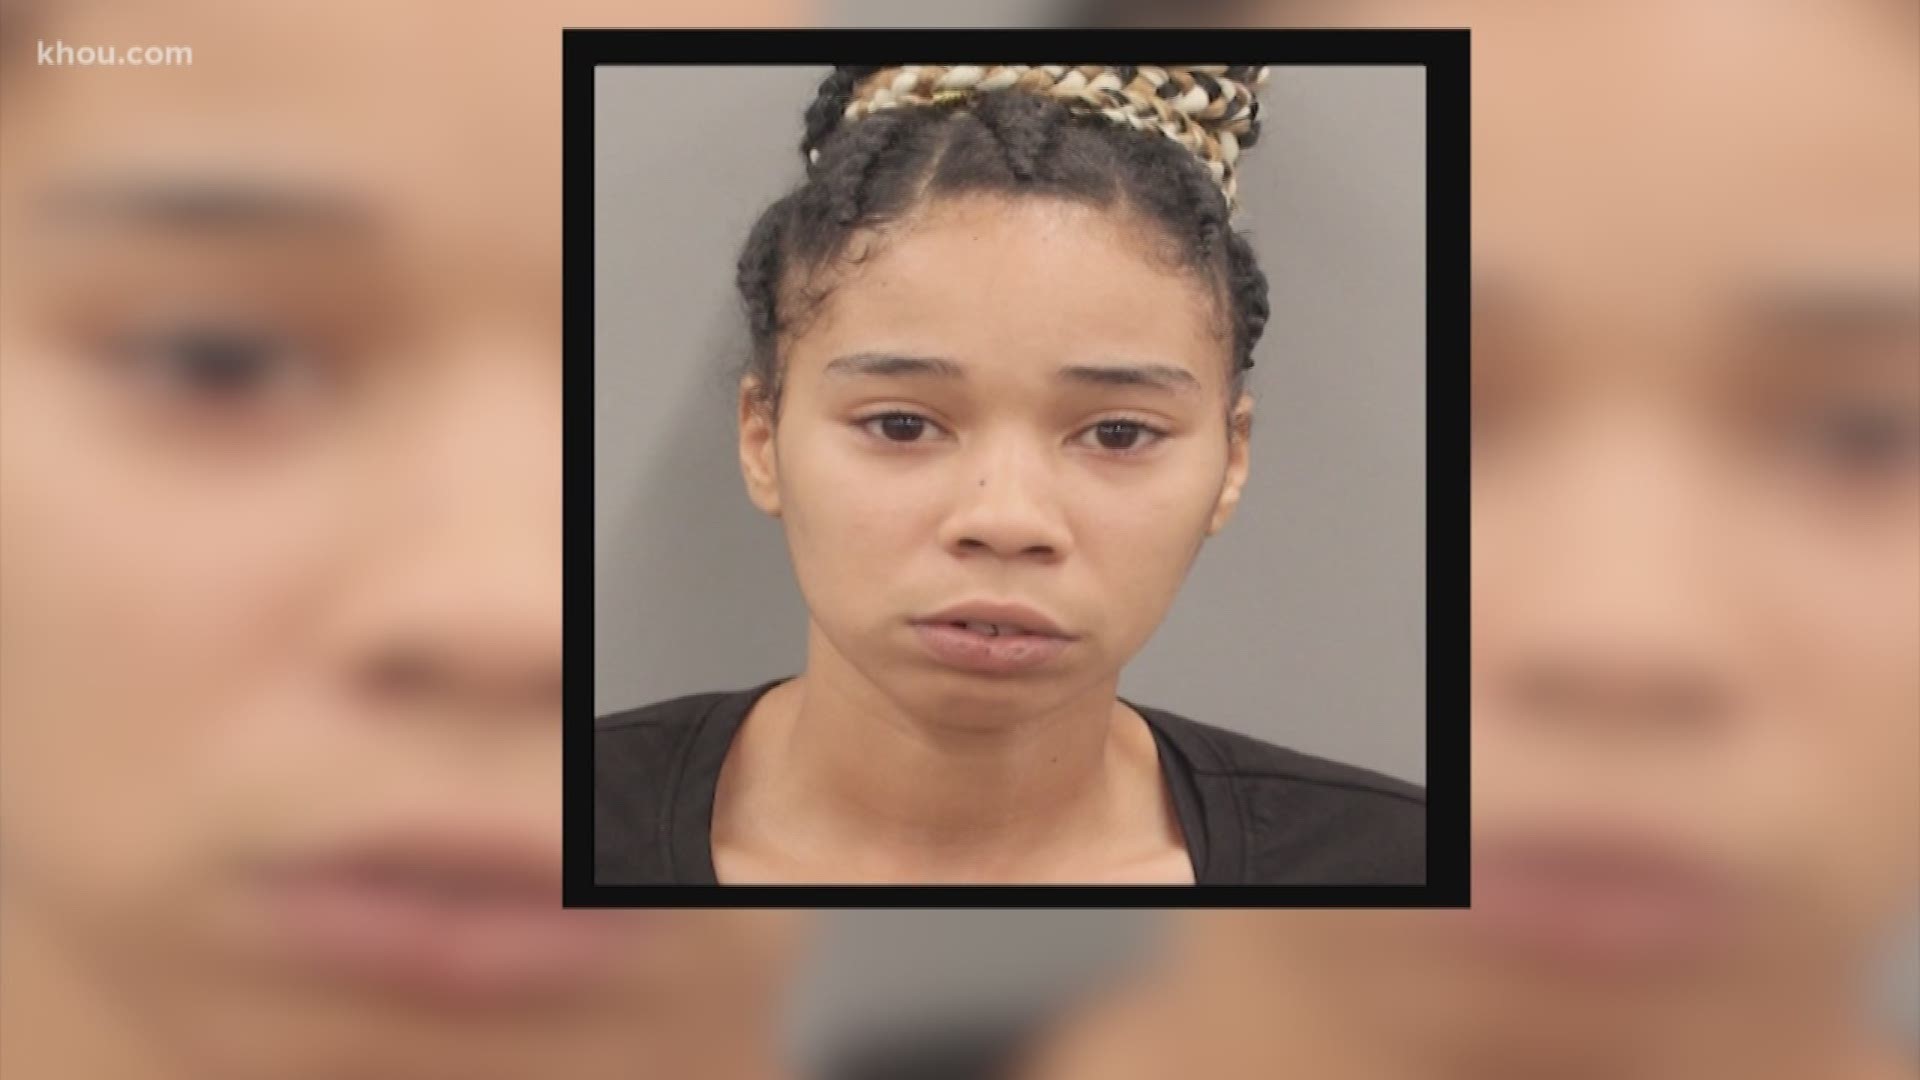 A 26-year-old mother has been charged in connection with the death of her 3-year-old son who was struck and killed in a parking spot at an apartment complex in west Houston. Lexus Stagg is charged with criminally negligent homicide in the child’s death from an auto-pedestrian crash on June 11 at the Westchase Grand apartment complex the 10800 block of Richmond Ave.